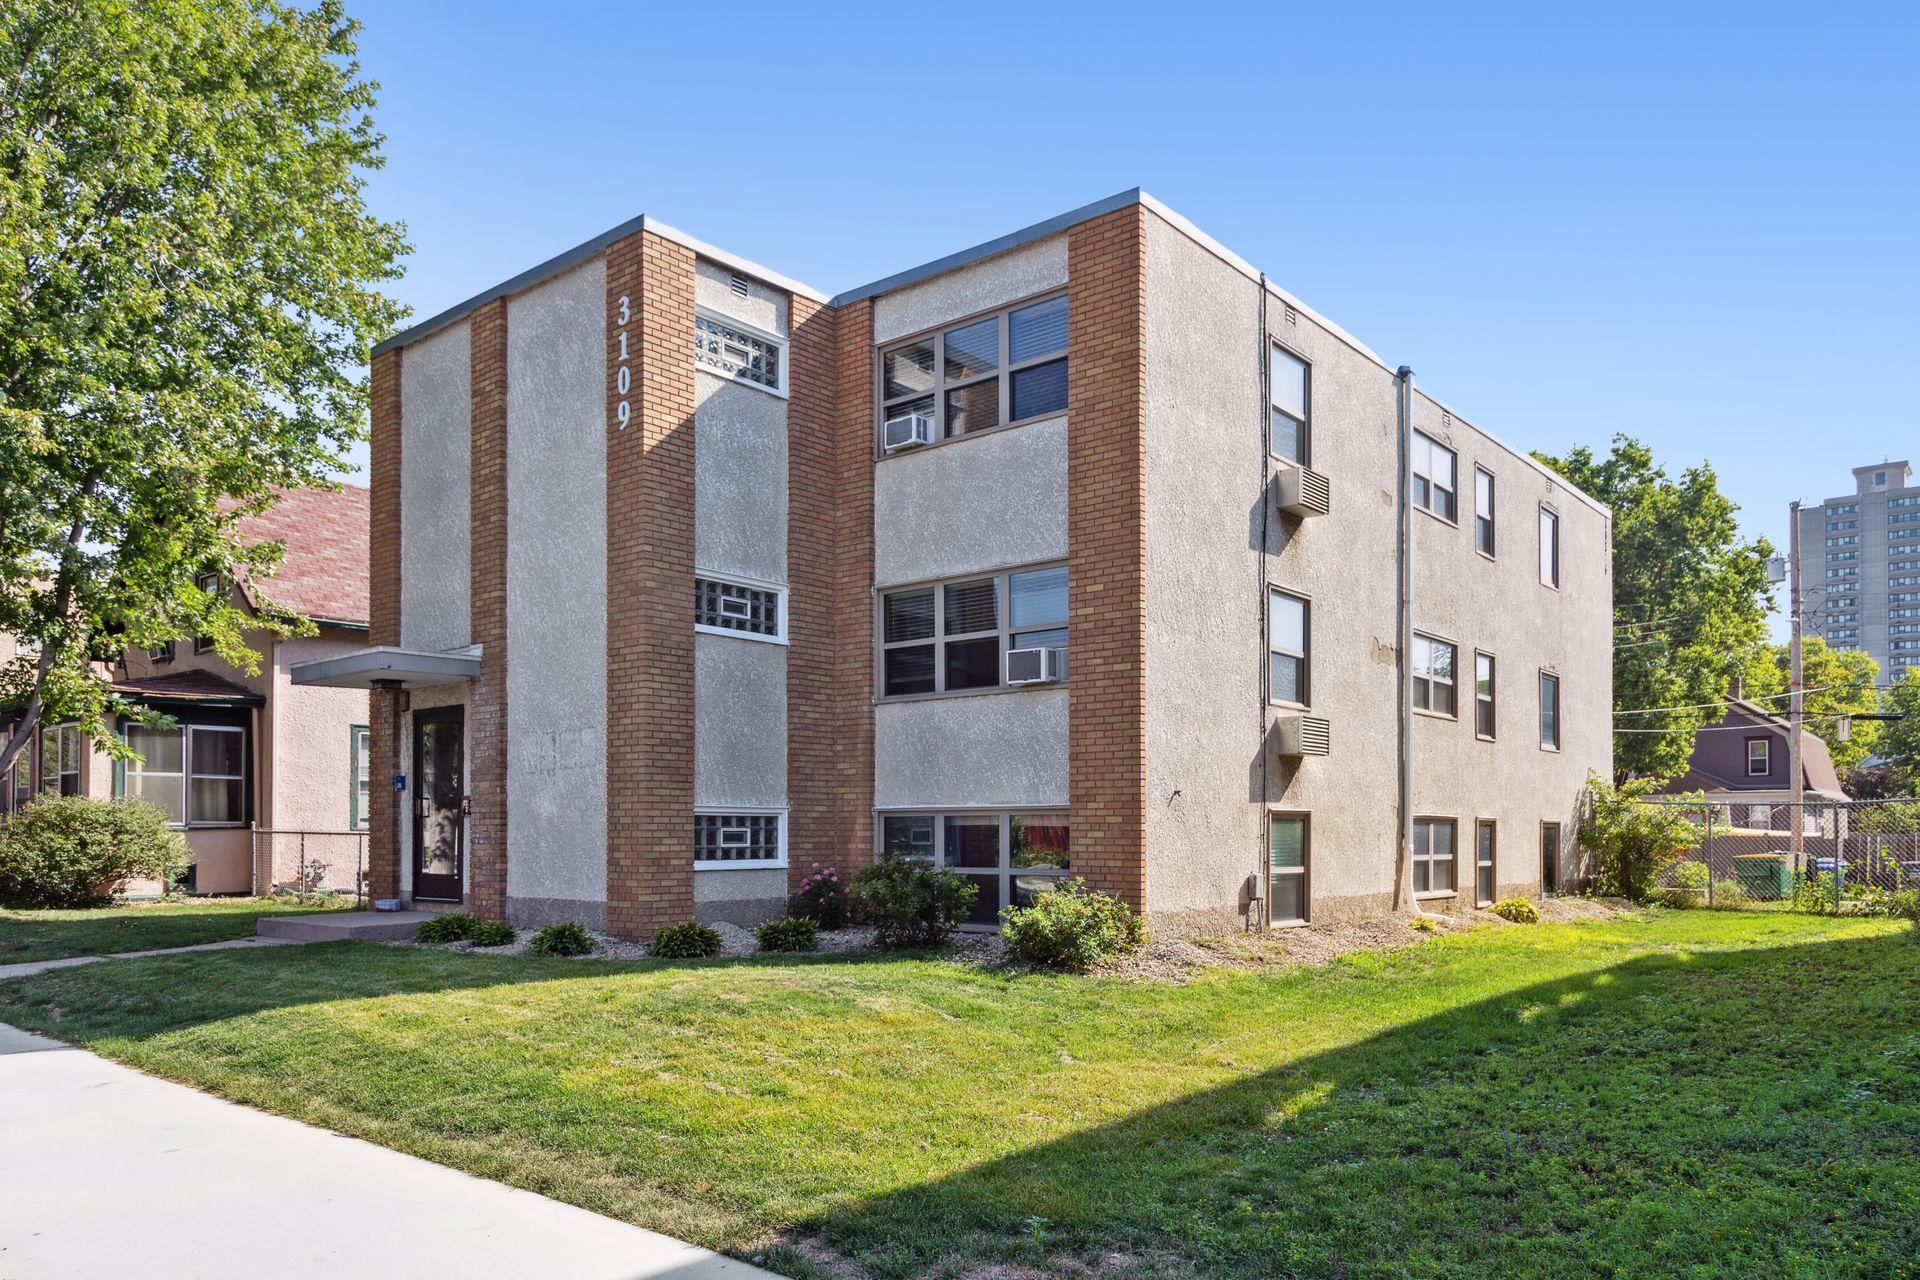 3109 Grand Ave South Minneapolis Mn. 6-unit stucco apartment building with just over 5,000 finished sqft in the heart of uptown blocks from the Minneapolis chain of Lakes.